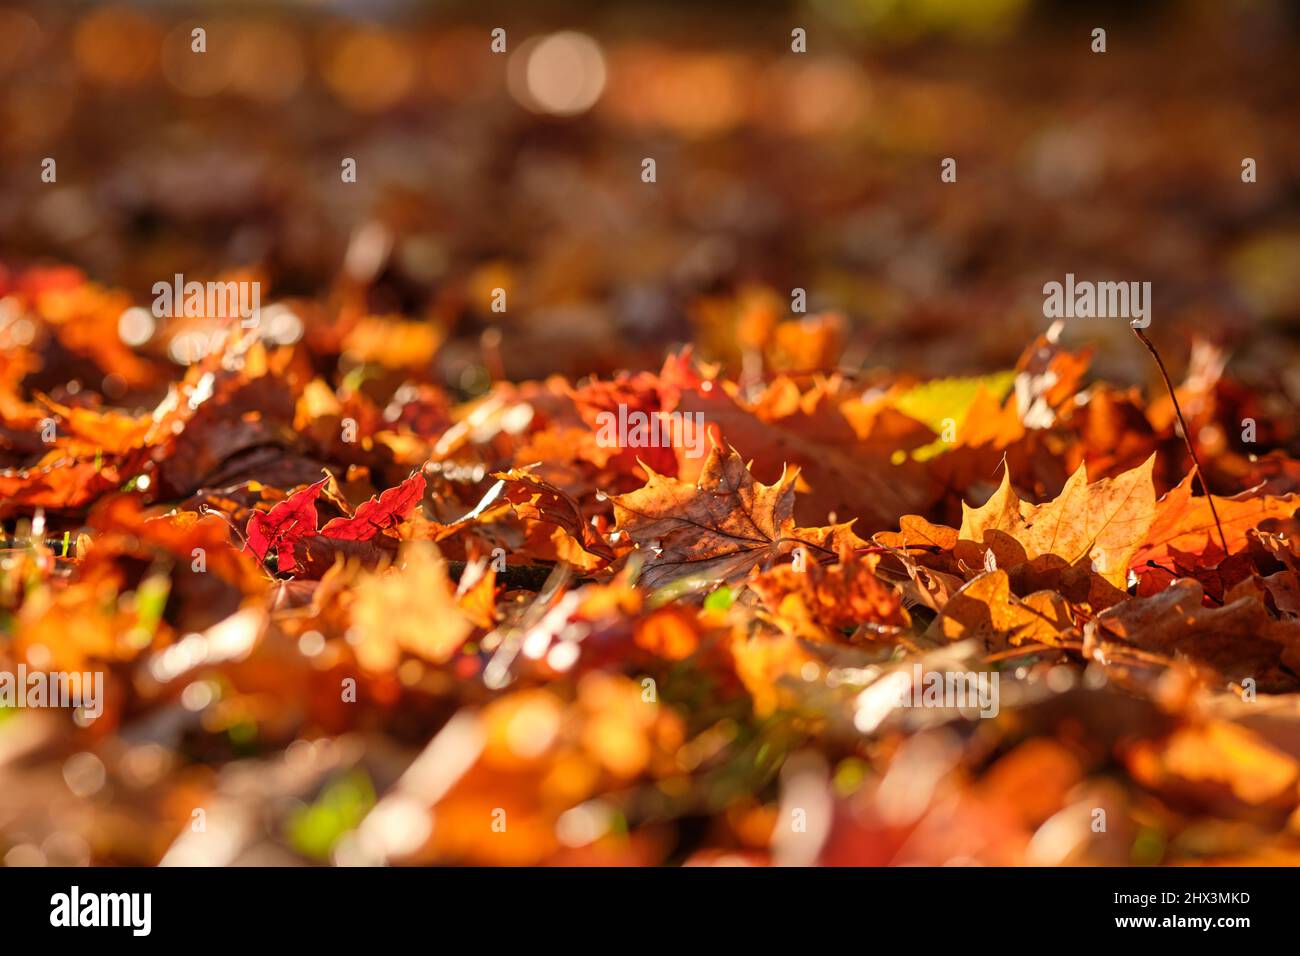 Close-up of beautiful colored autumn leaves lying on the ground in the sunlight. Seen in Germany in October. Stock Photo